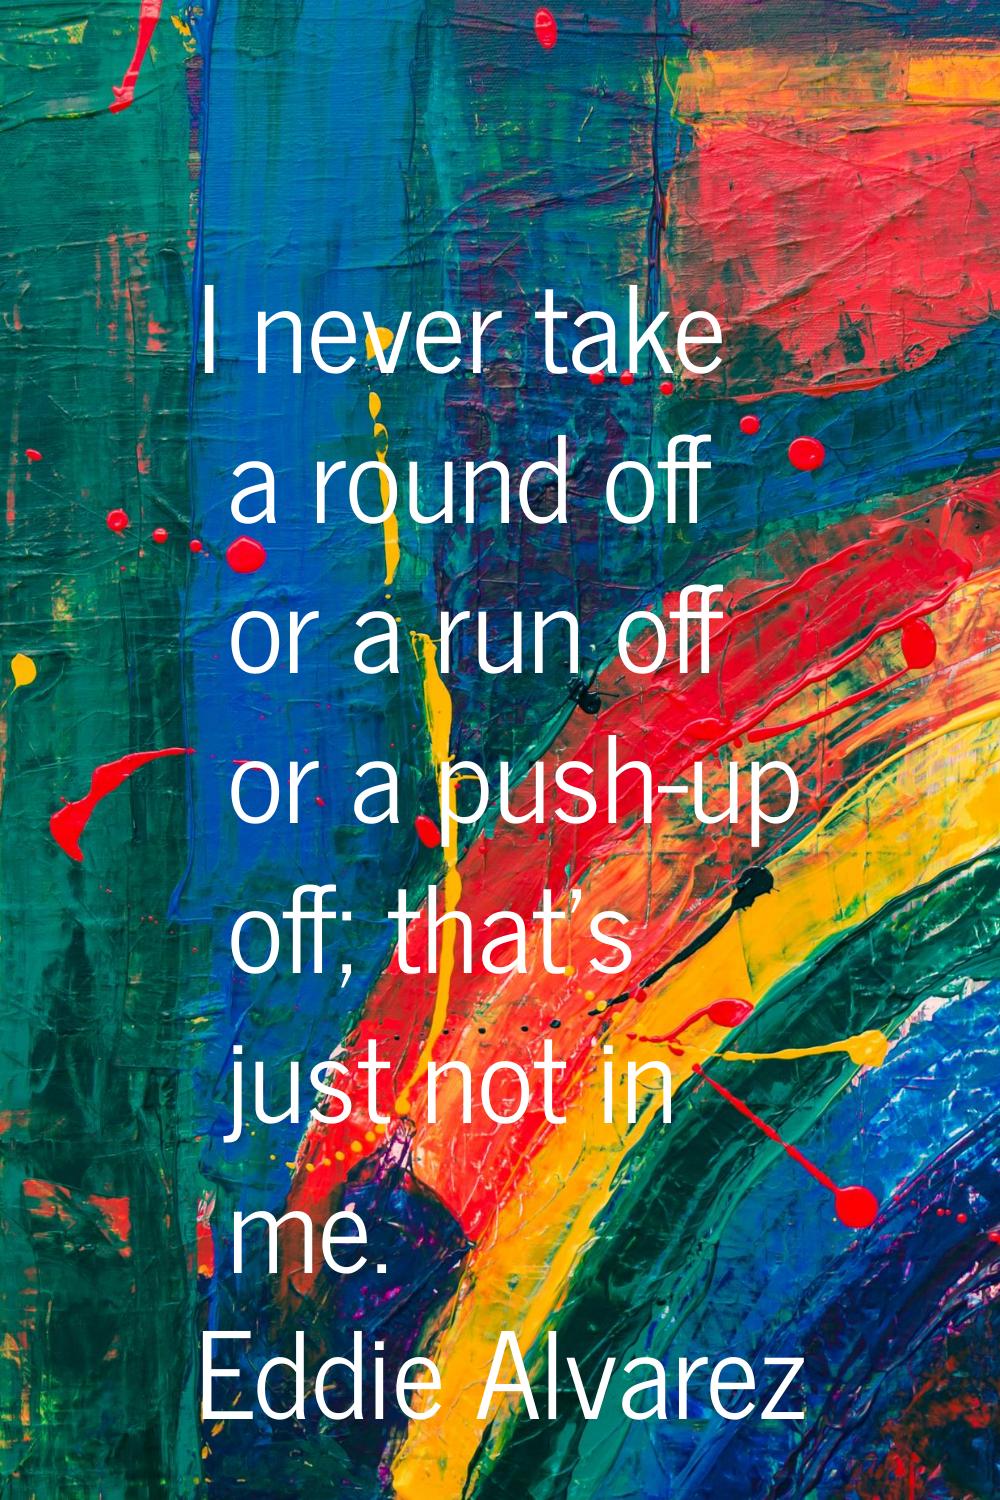 I never take a round off or a run off or a push-up off; that's just not in me.